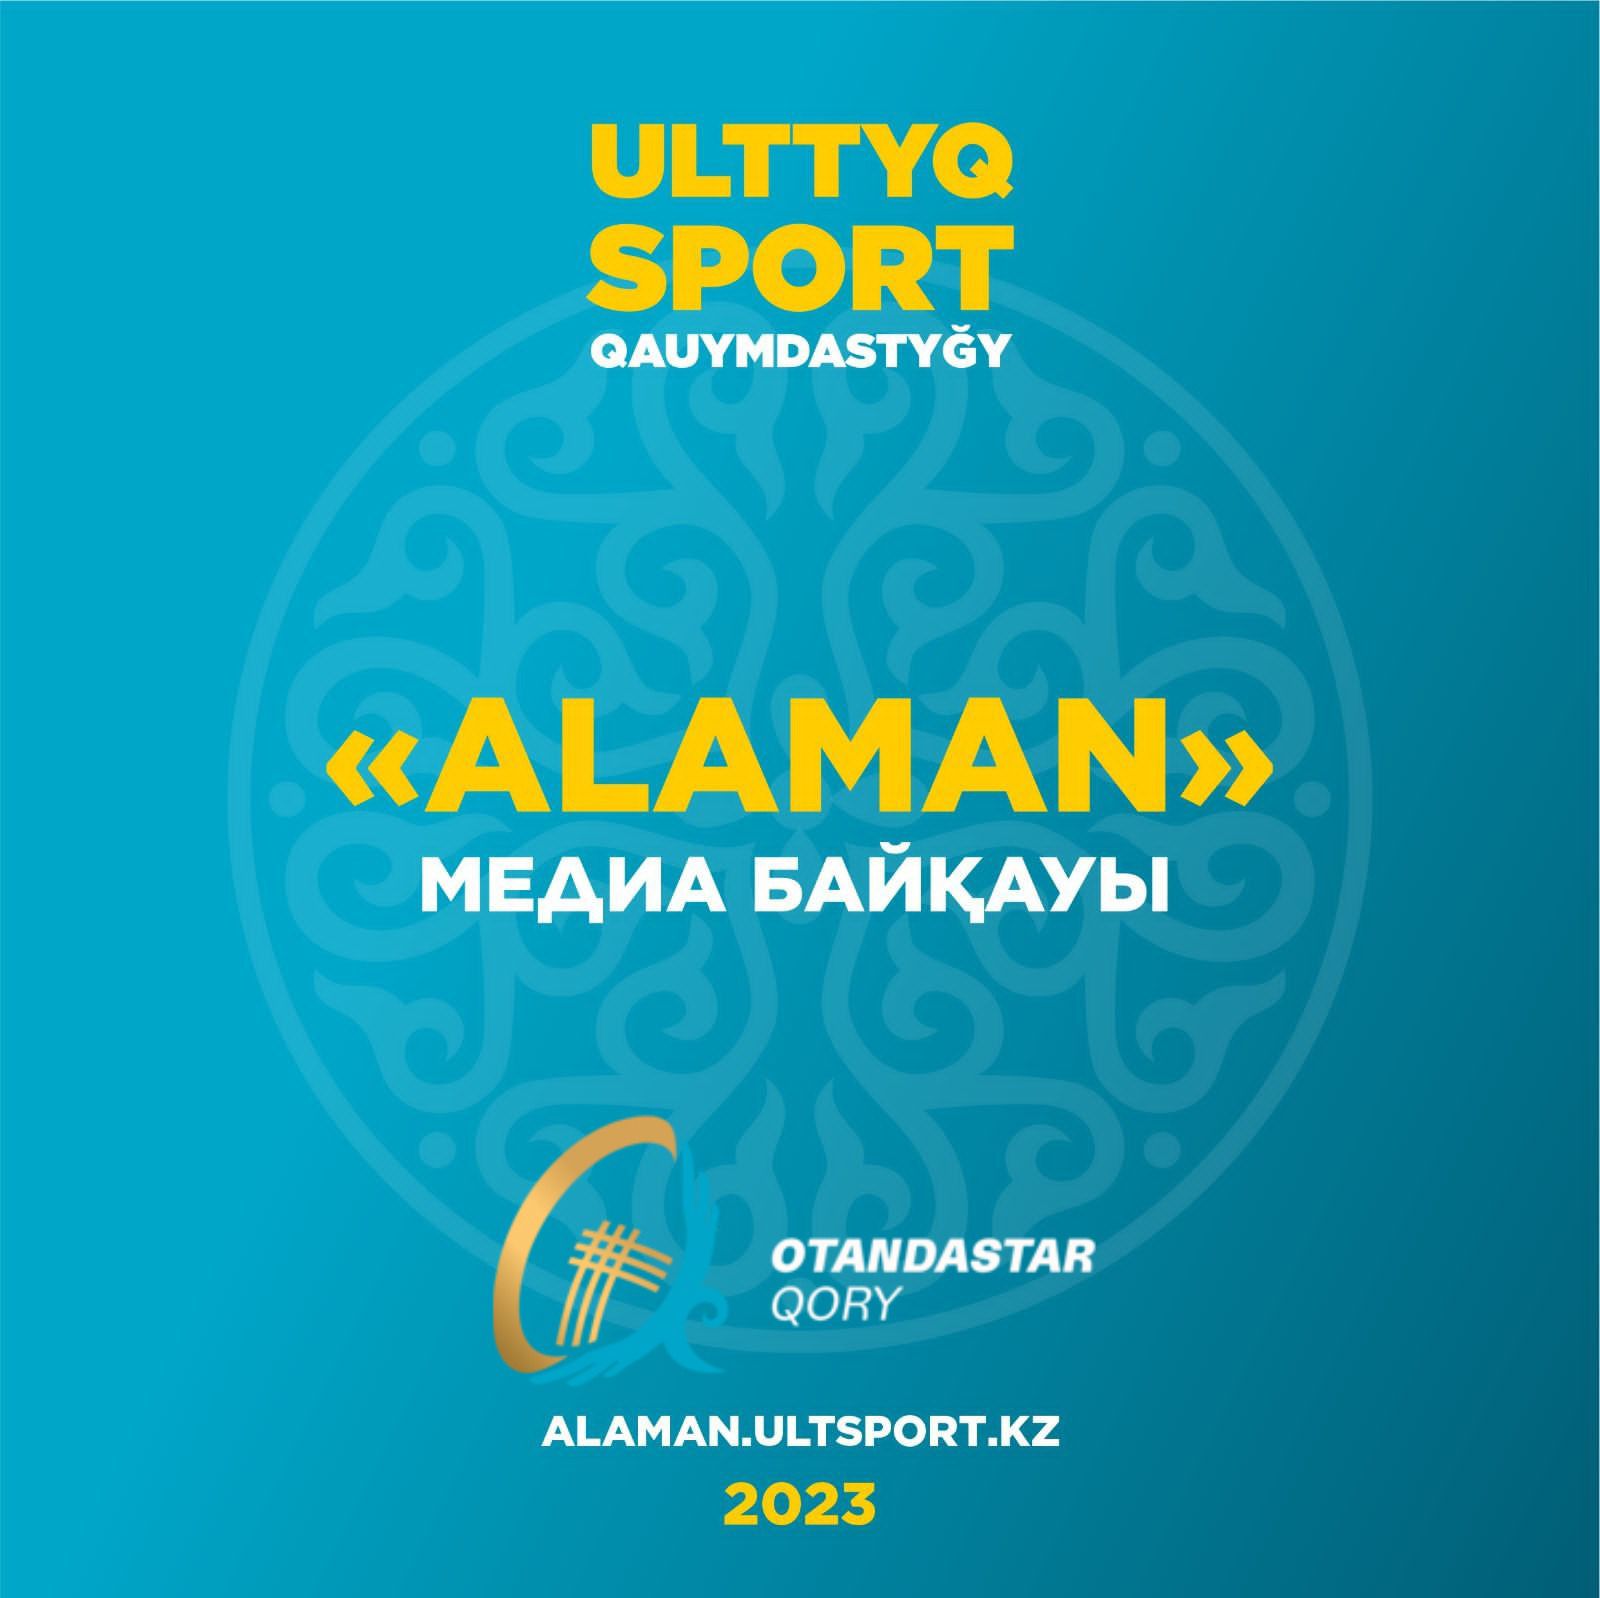 Representatives of foreign Kazakh-language media can also participate in the media contest "ALAMAN"